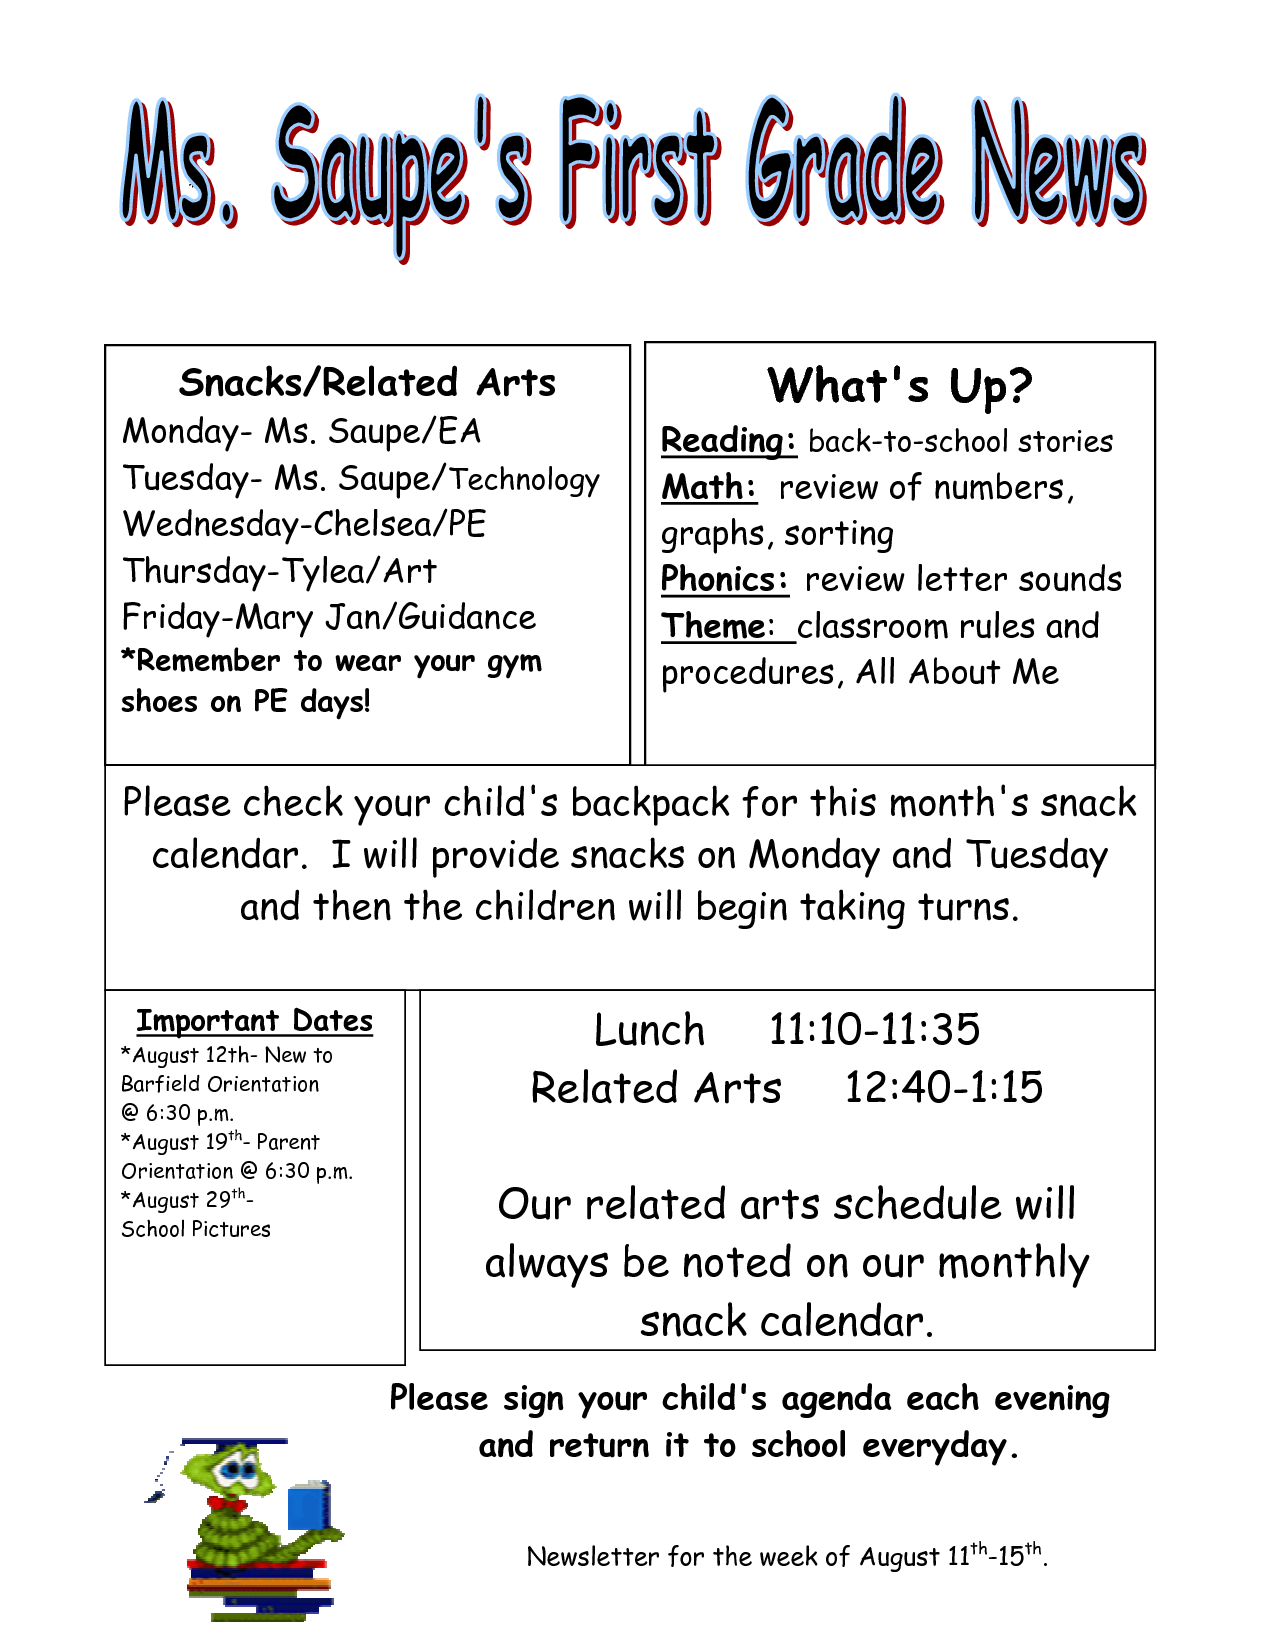 Weekly Letter to Parents Template - High School Newsletter Templates Free High School Newsletter